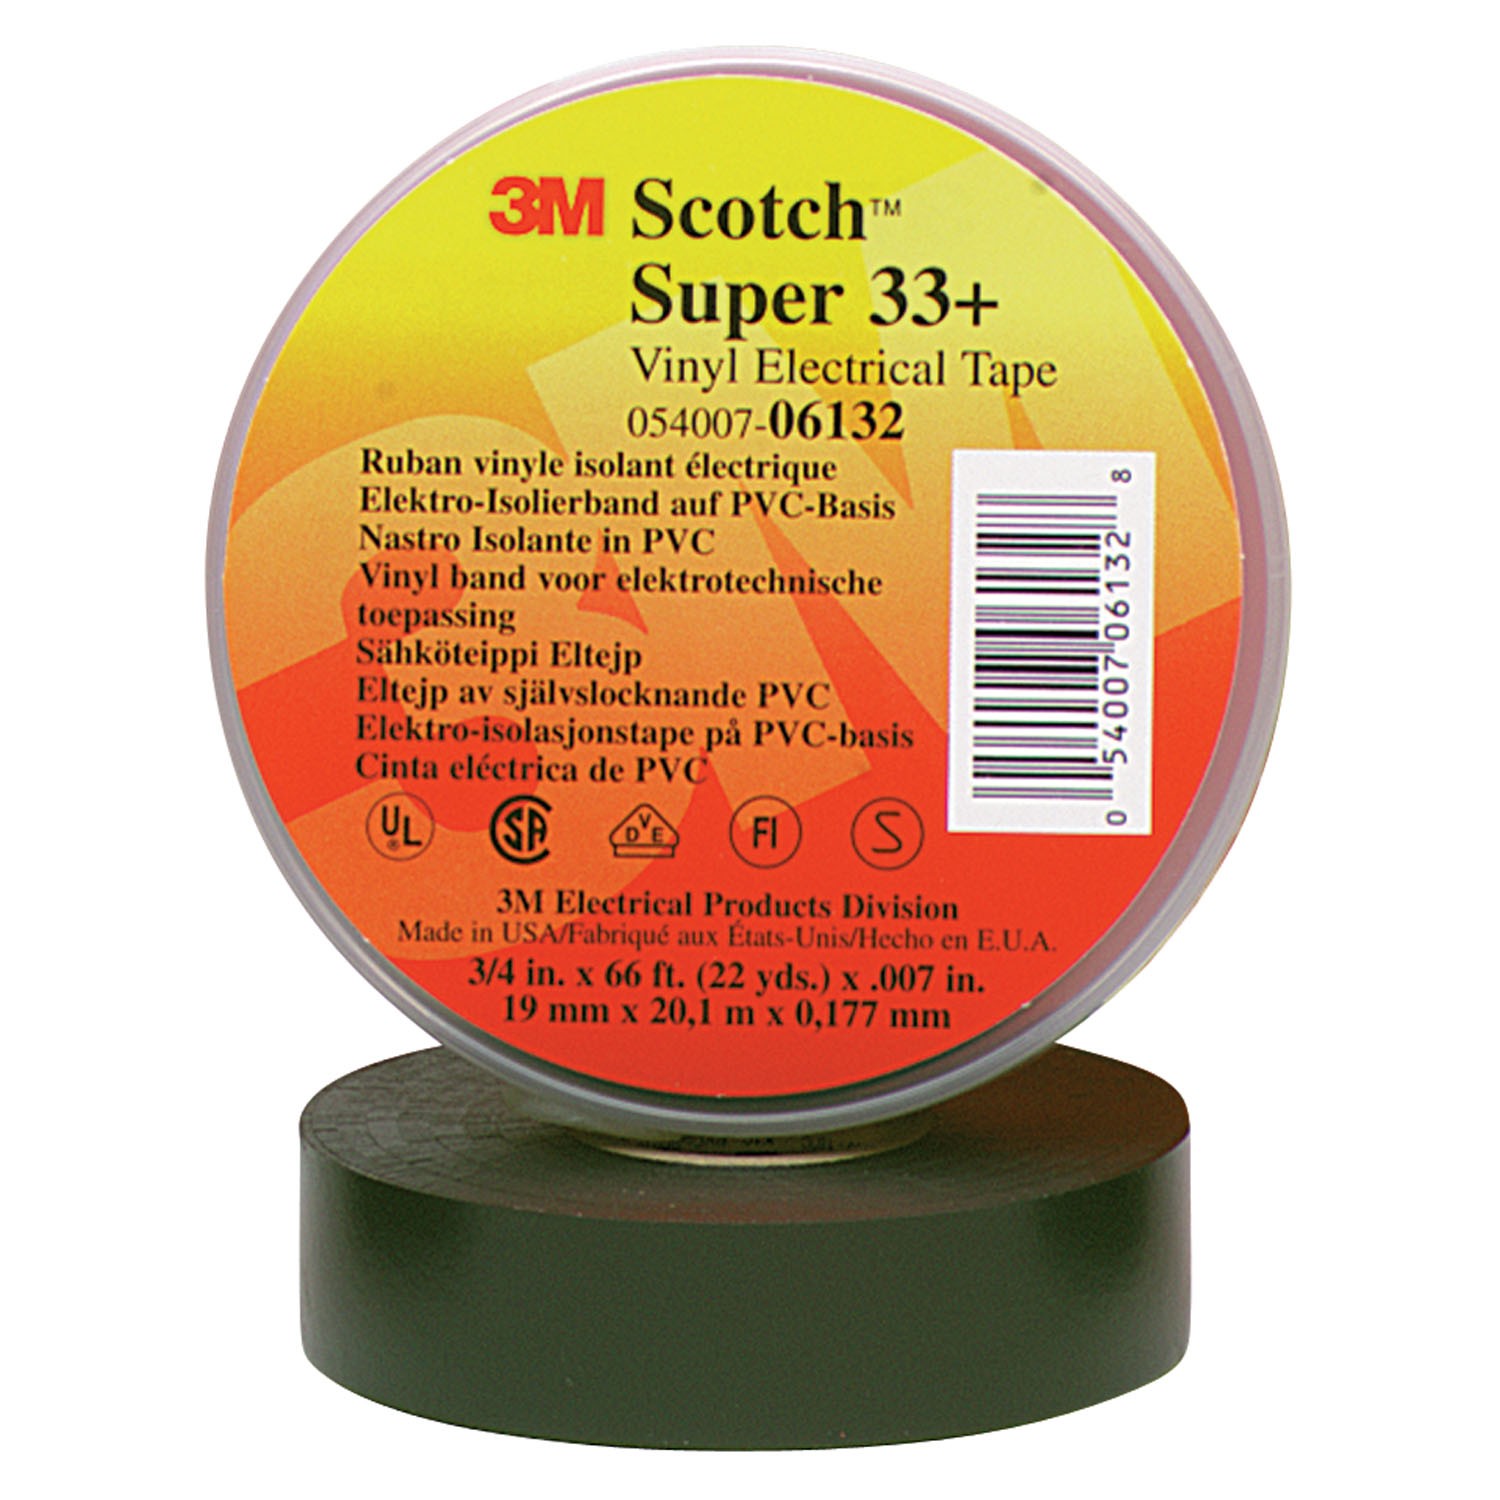 3/4" 3M Scotch Super 33+ Vinyl Electrical Tape with Non-Thermosetting Rubber Adhesive, black, 3/4" wide x  36 YD roll